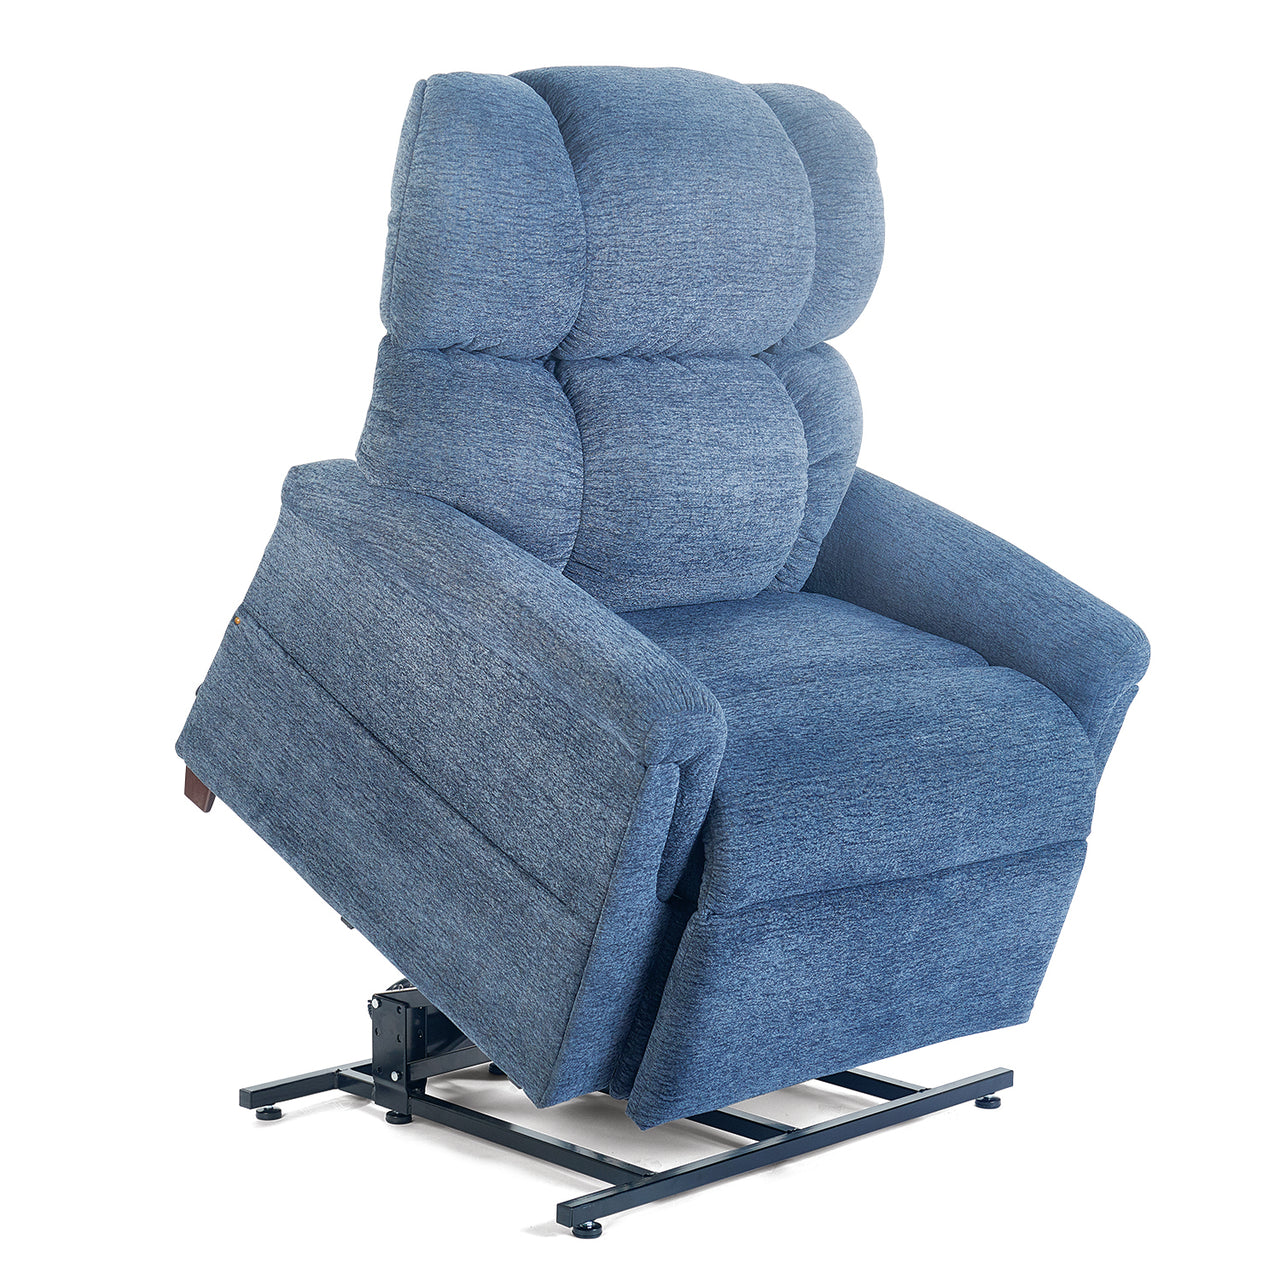 Lift Chair Recliner - Extra Wide - Rental